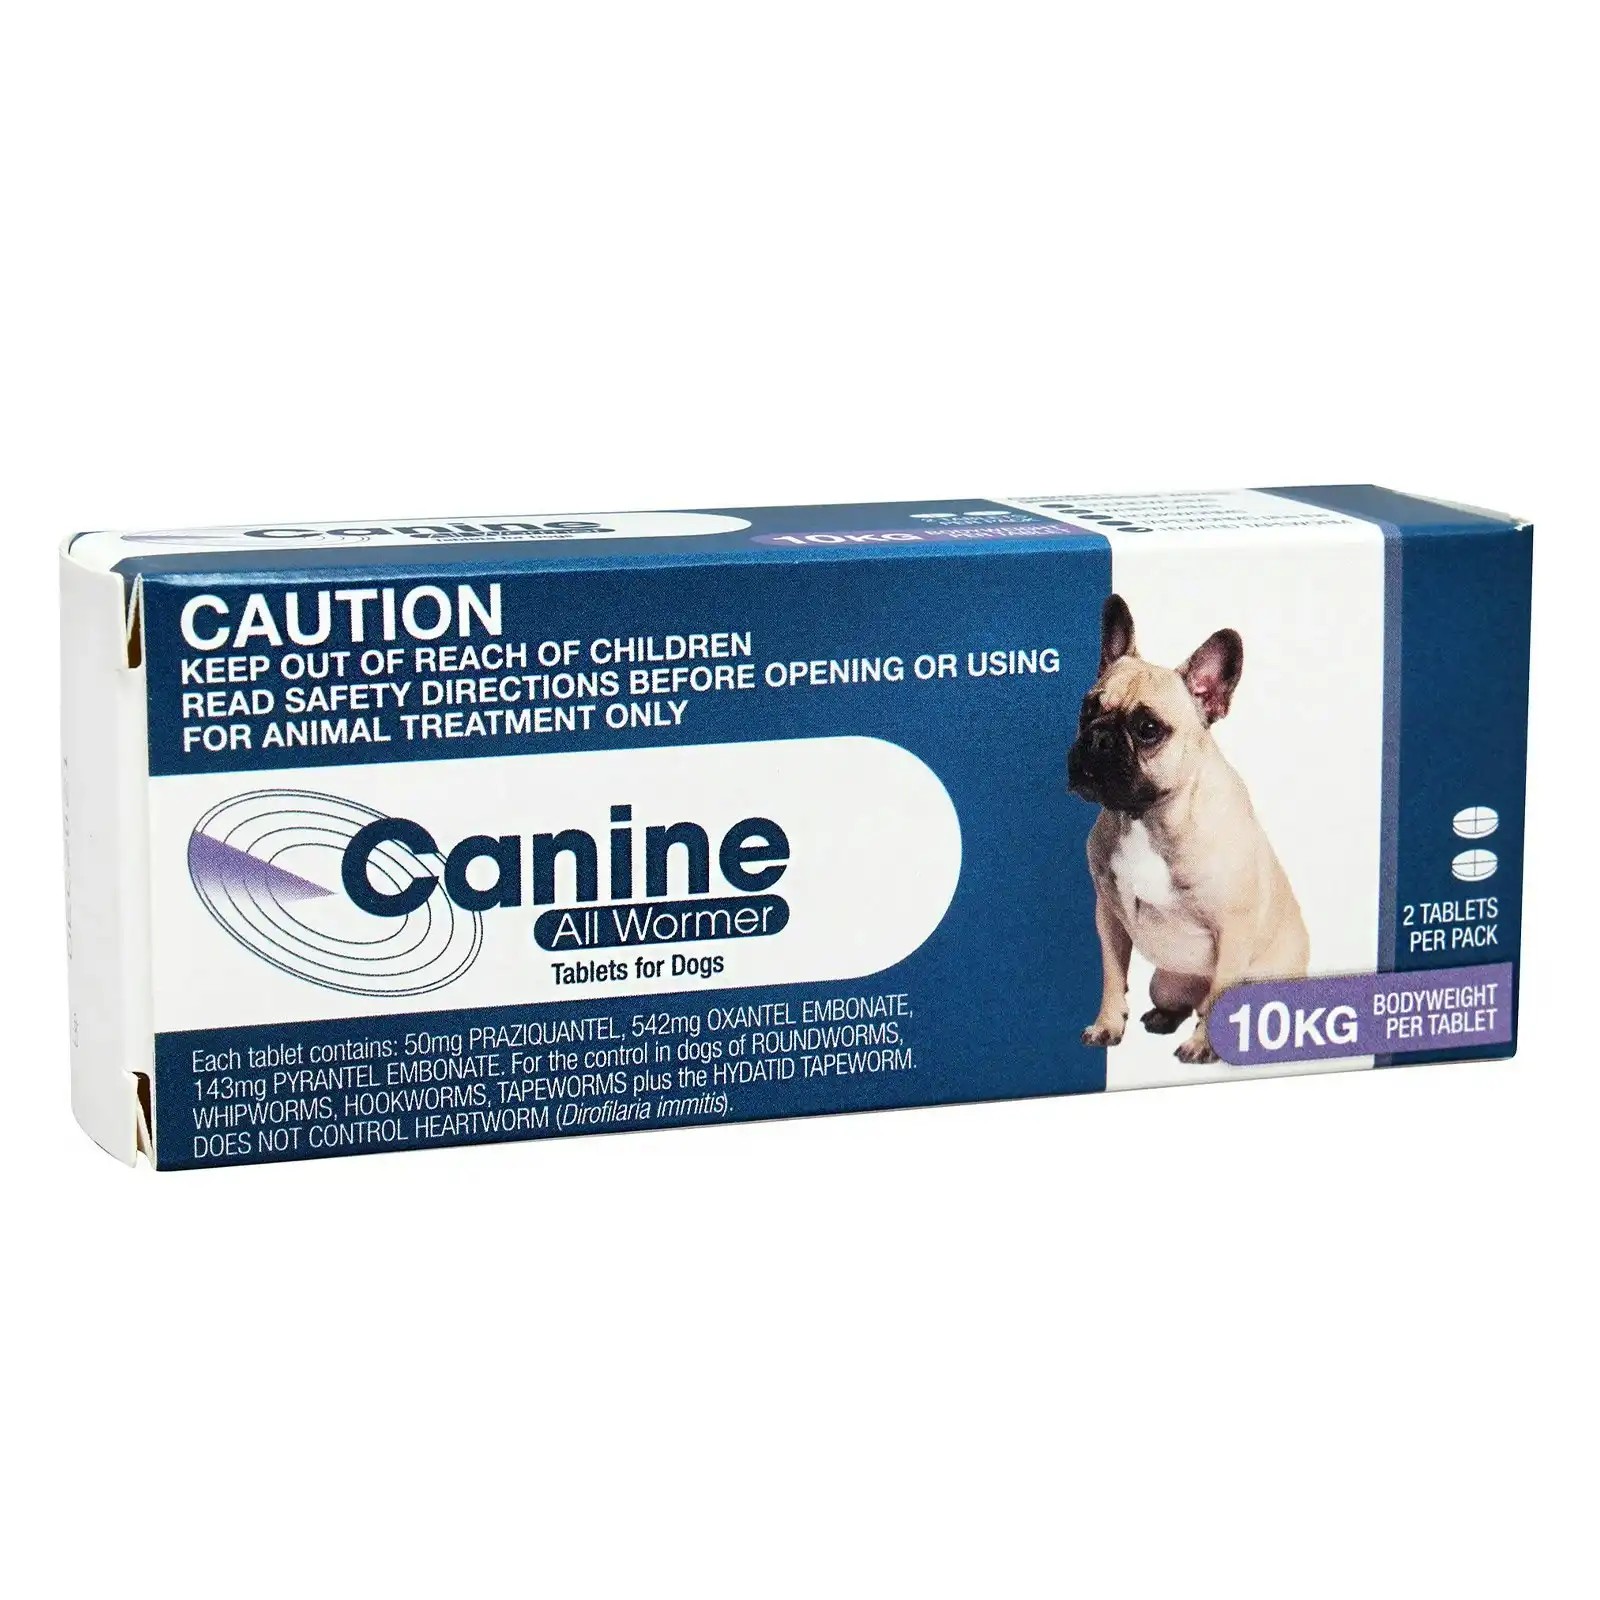 Value Plus Canine All Wormer 10kg (Purple) 2 Tablets